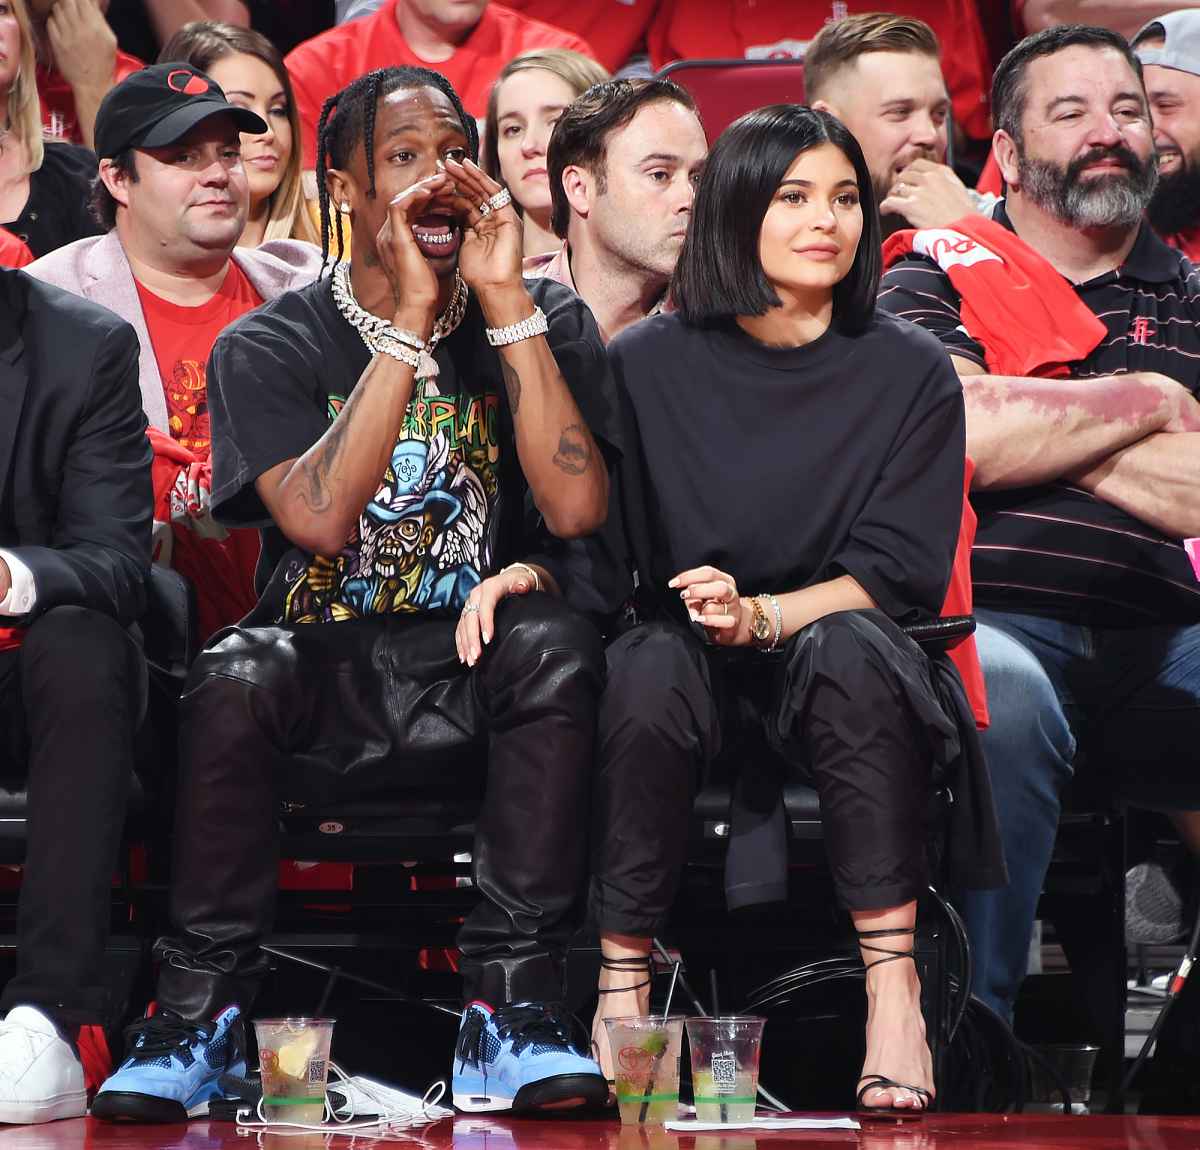 Kylie Jenner, left, and Travis Scott walks to their seats during the second  half in Game 2 of a first-round NBA basketball playoff series between the  Houston Rockets and the Minnesota Timberwolves